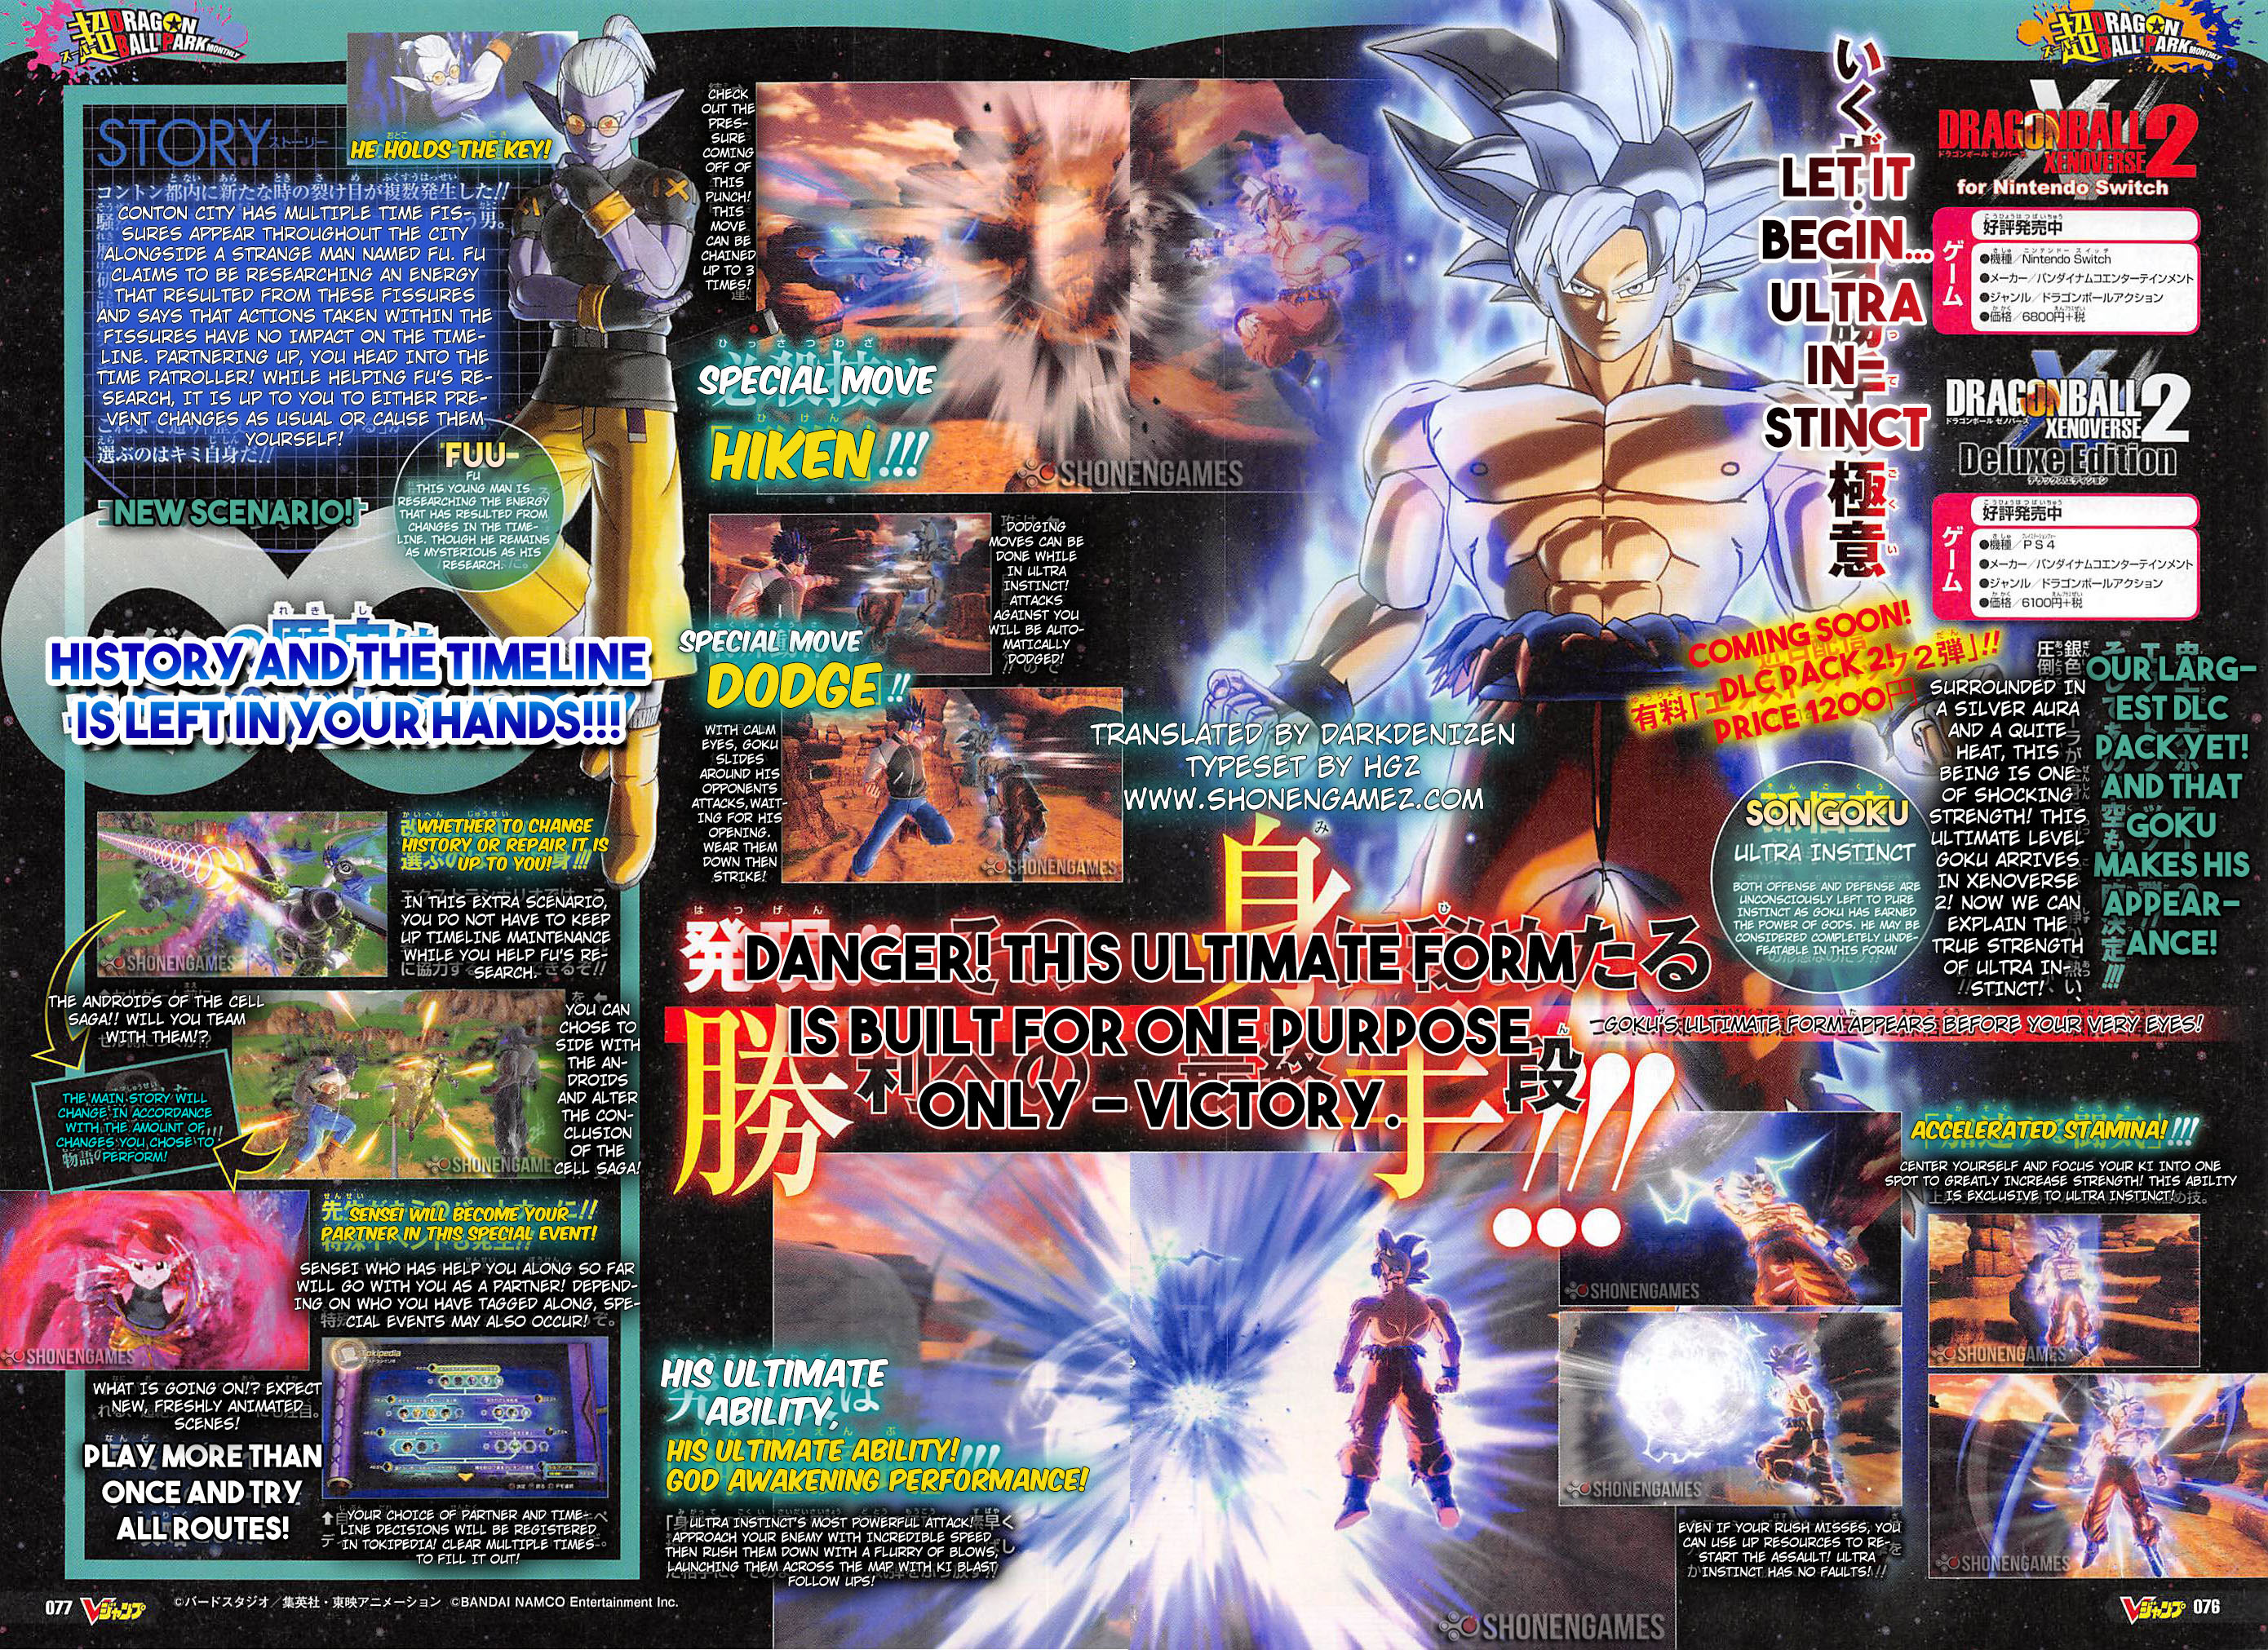 Dragon Ball Xenoverse 2: Goku Ultra Instinct and new story features in DLC Extra Pack 2 ...